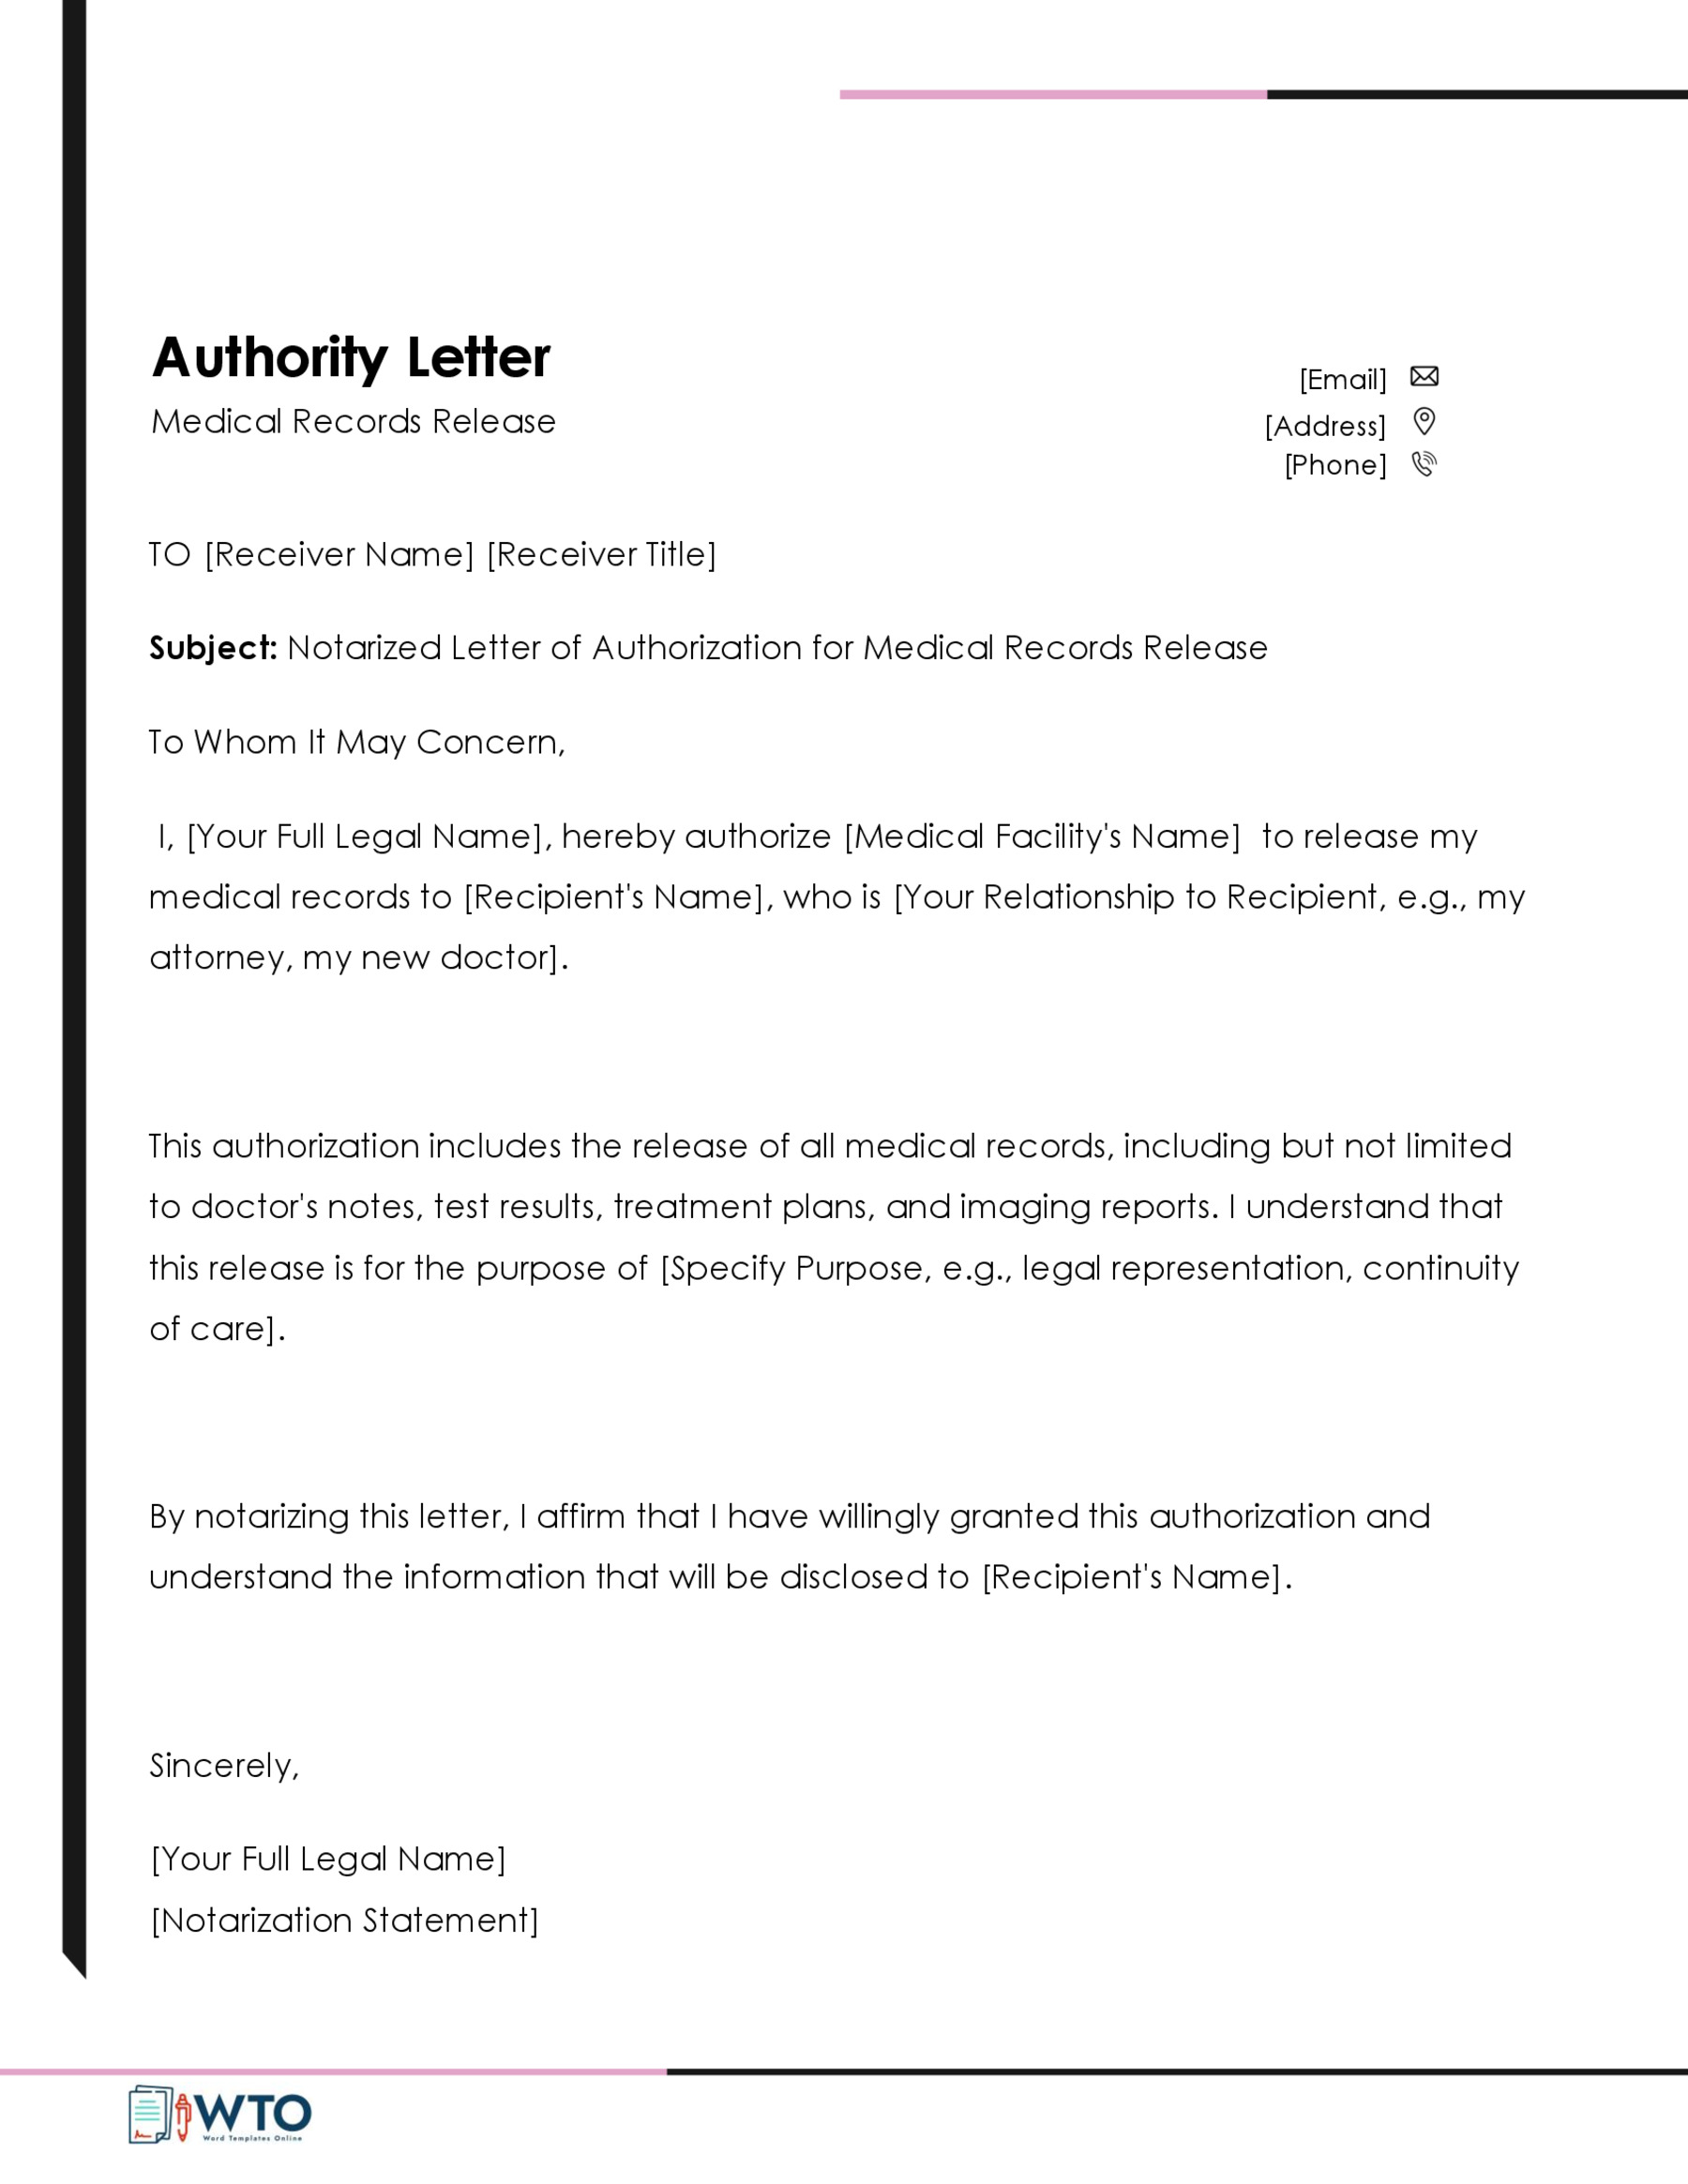 Notarized letter of authorization tamplate-Downloadable word format